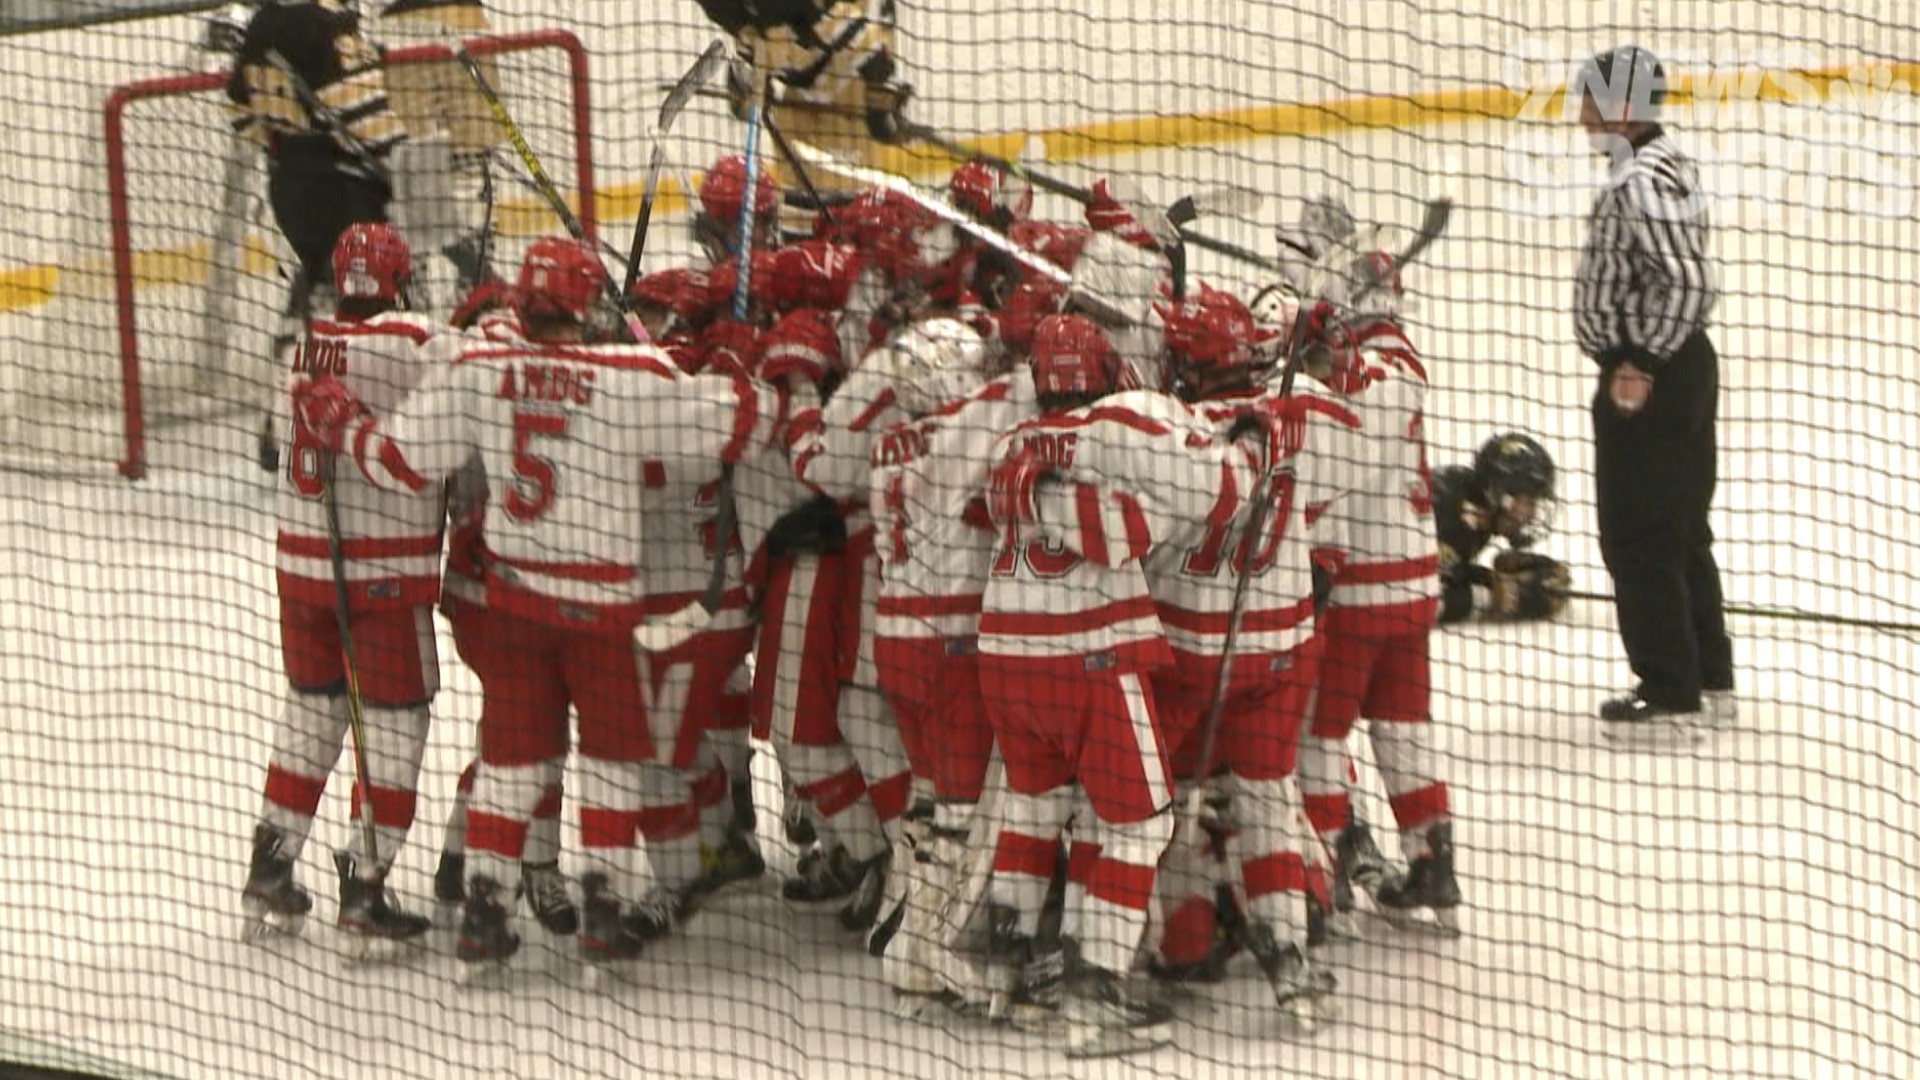 The Raiders defeated the Coyotes 4-3 in double overtime Tuesday night to advance to the Class 5A semifinals.